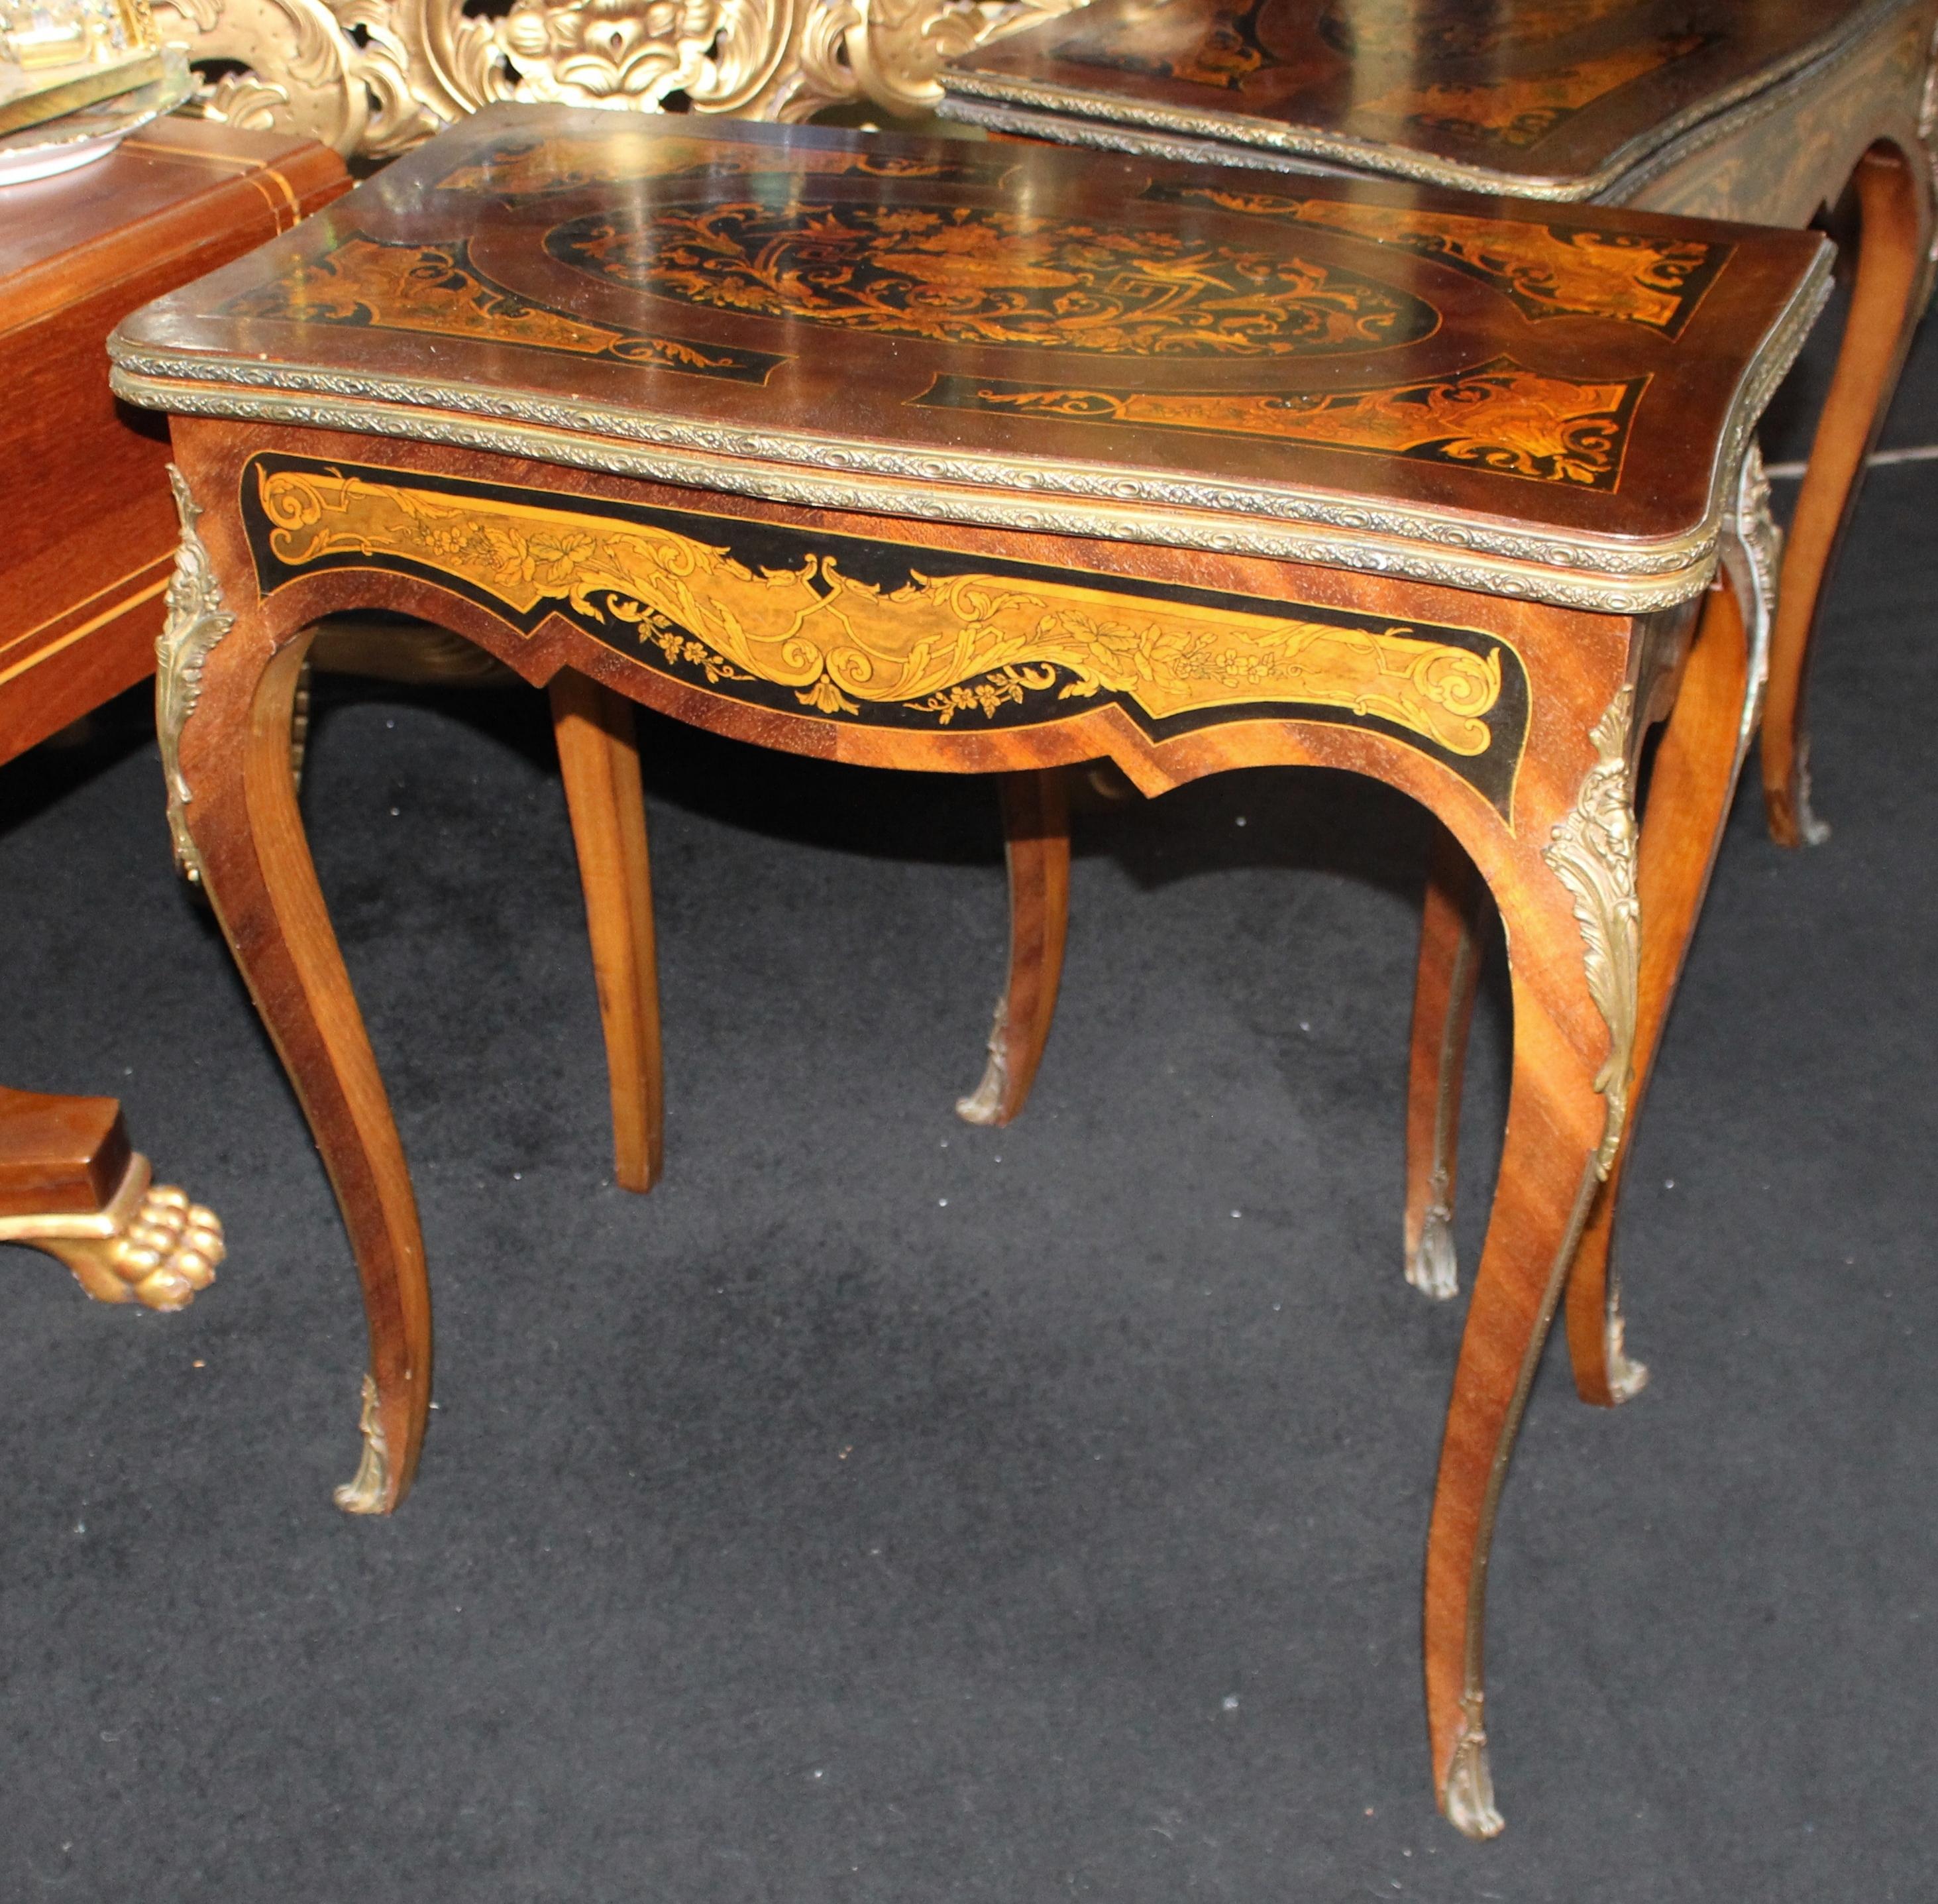 Width 77 cm 30 1/4 in
Depth 41 cm 16 1/4 in
Height 77.5 cm 30 1/2 in

Period Victorian
Decoration Inlaid; mahogany veneers, fruitwoods, ebony and satinwood
Condition Good condition. Sound structure, original mounts. A few marks to finish